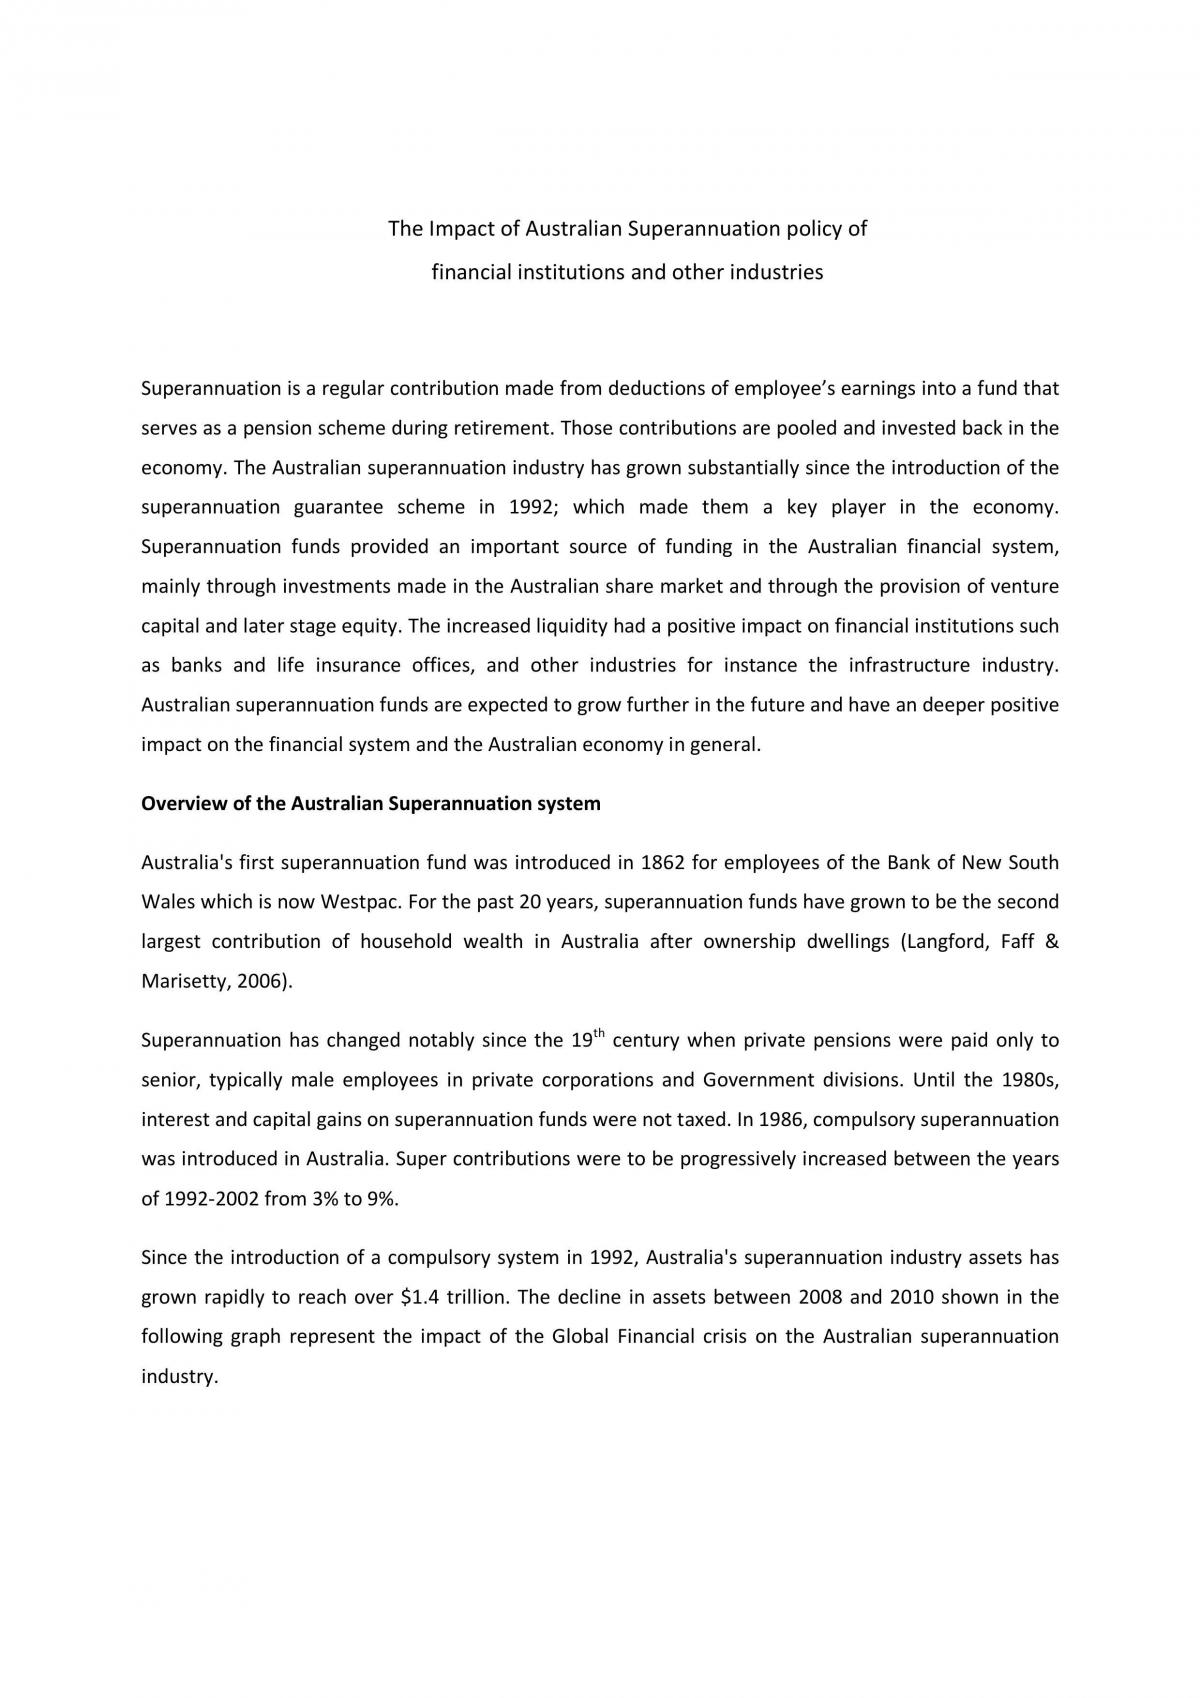 The Impact of Australian Superannuation Policy of Financial Institutions and Other Industries - Page 1